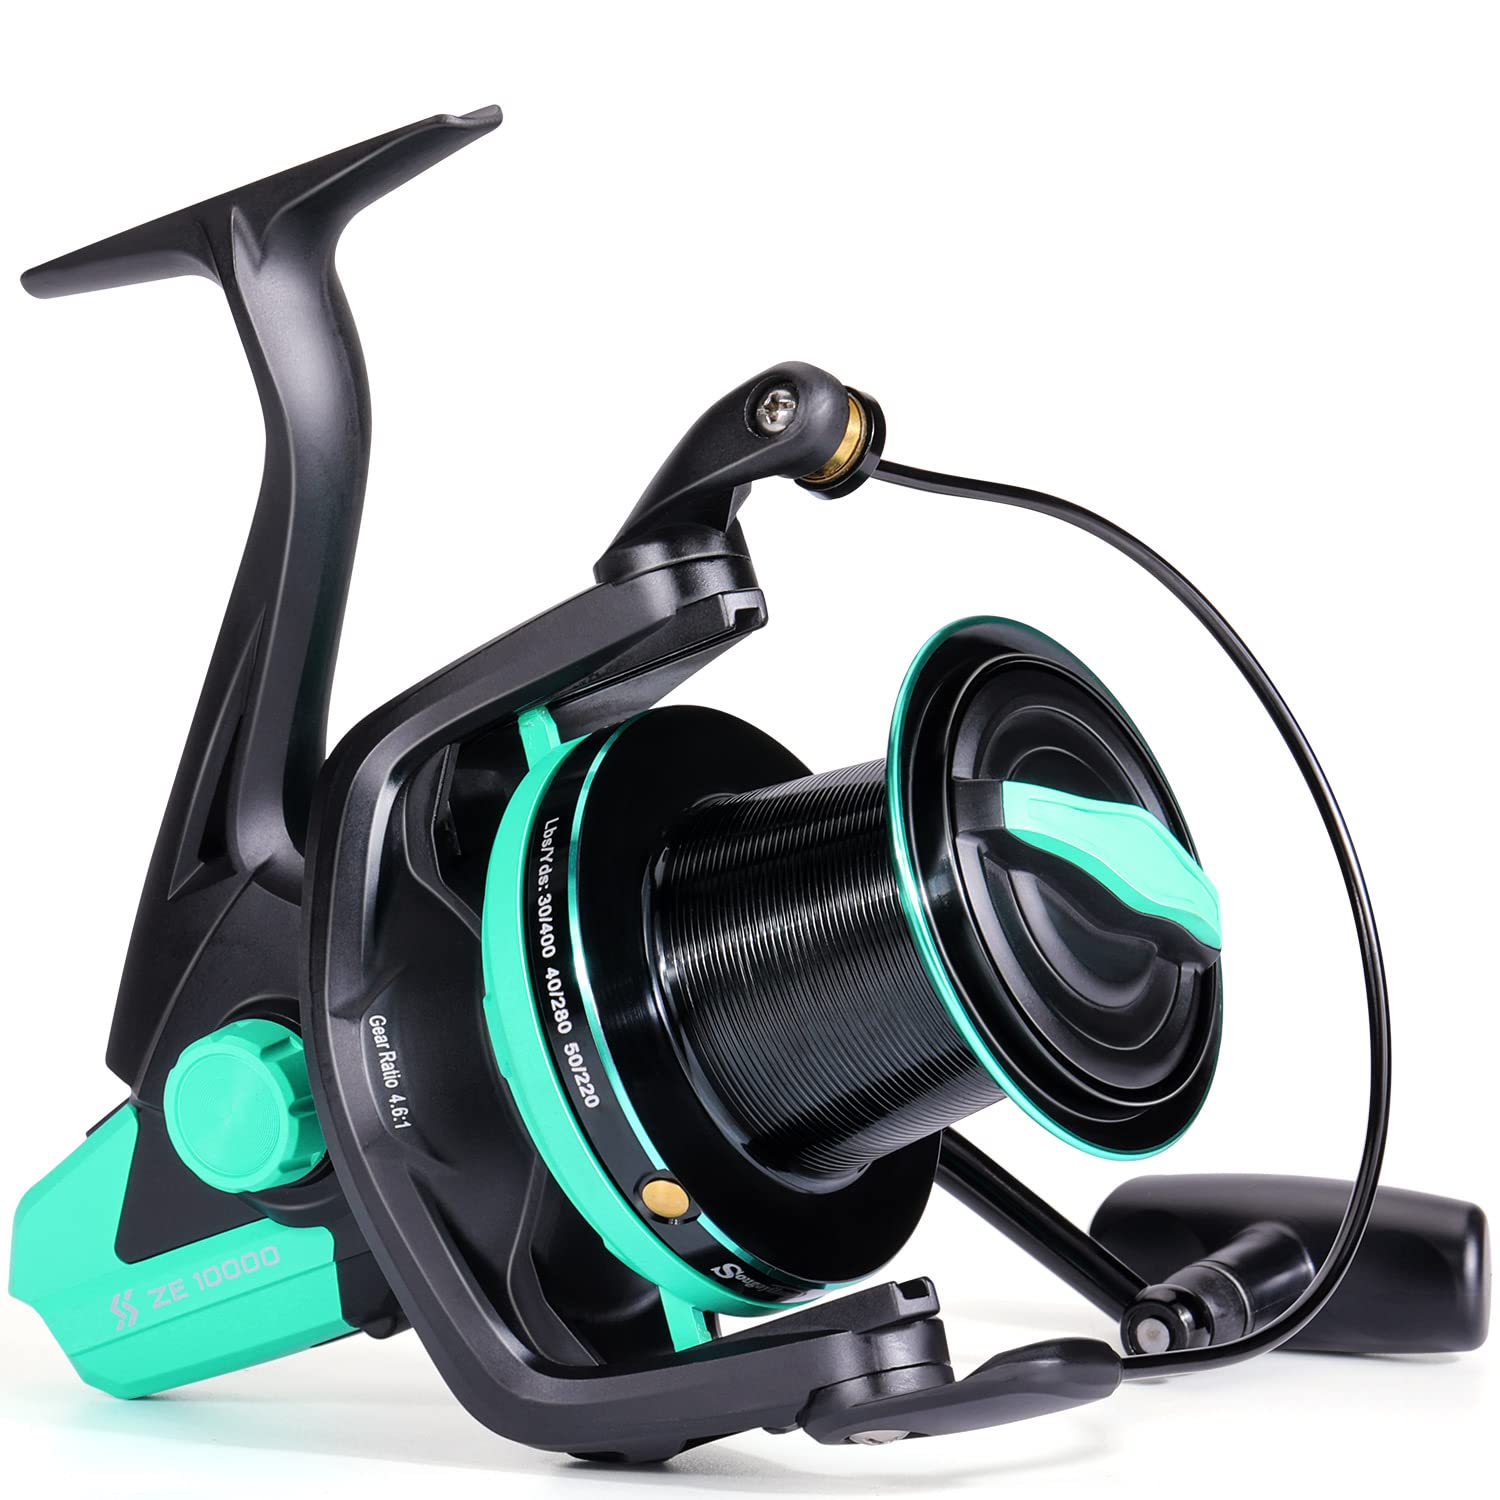 Sougayilang Surf Spinning Fishing Reel Super Smooth Powerful Drag with 111 Stainlesss BBLong Casting 10000 Oversize Series